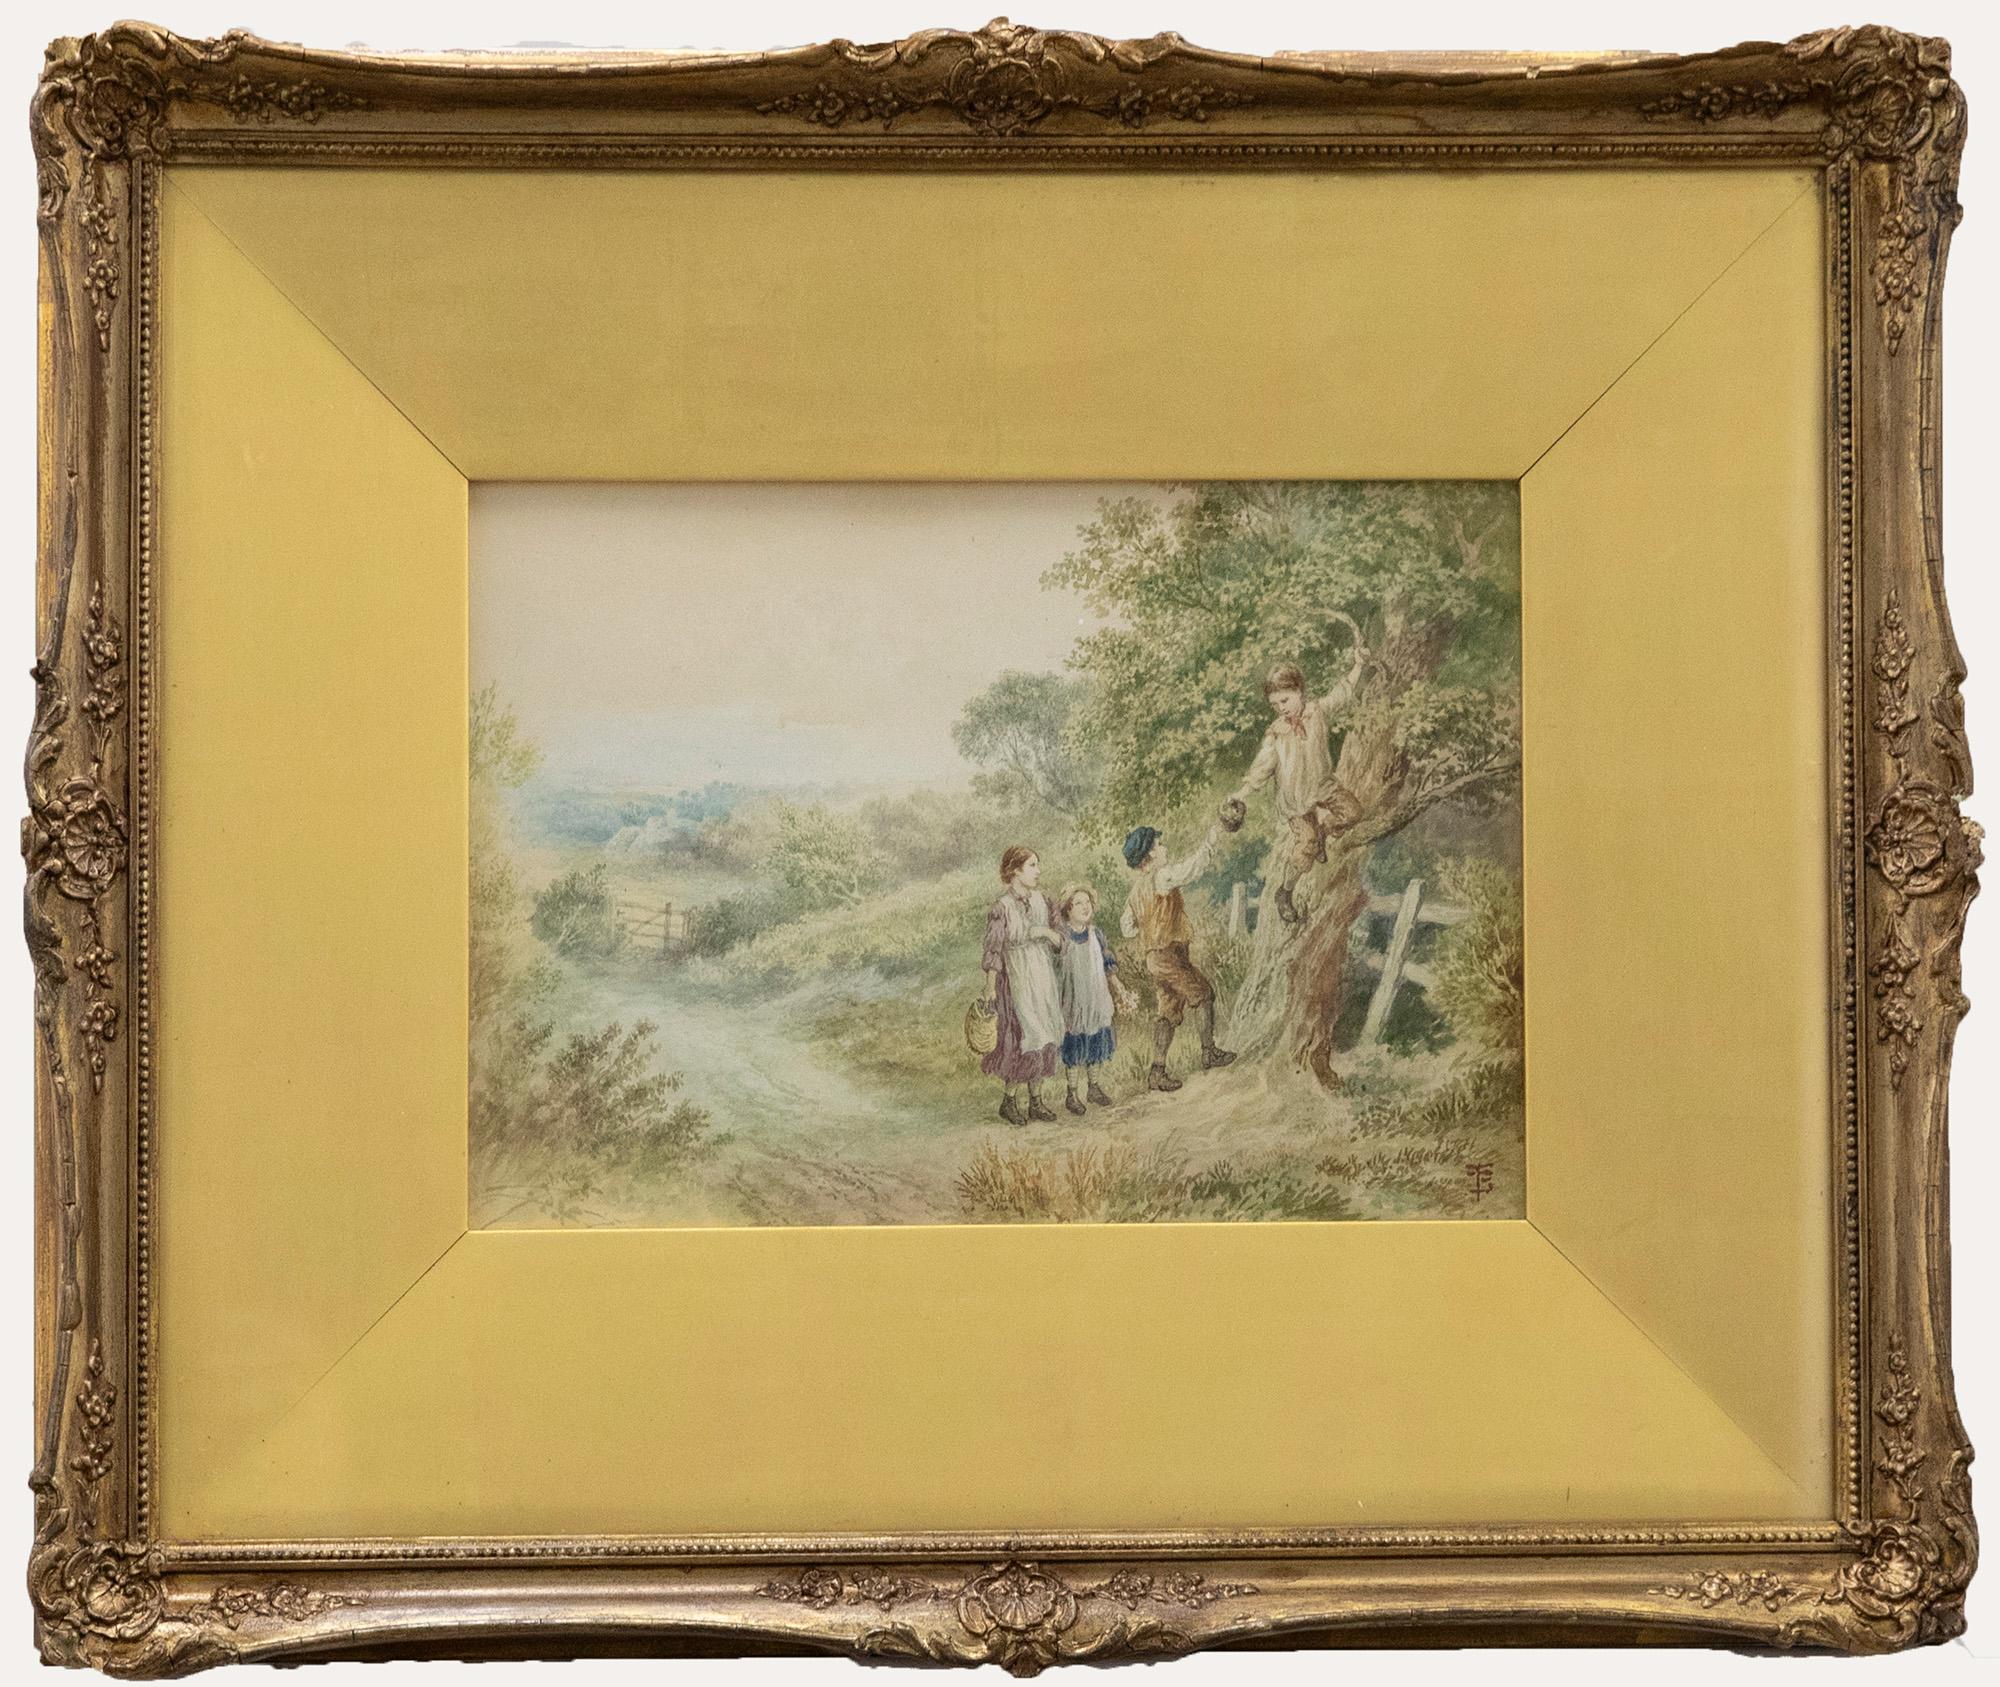 A charming watercolour study in the style of British artist Myles Birket Foster RWS. The scene depicts a group of children snatching eggs from a wild birds nest. The watercolour has been signed with the artist's monogram to the lower right.